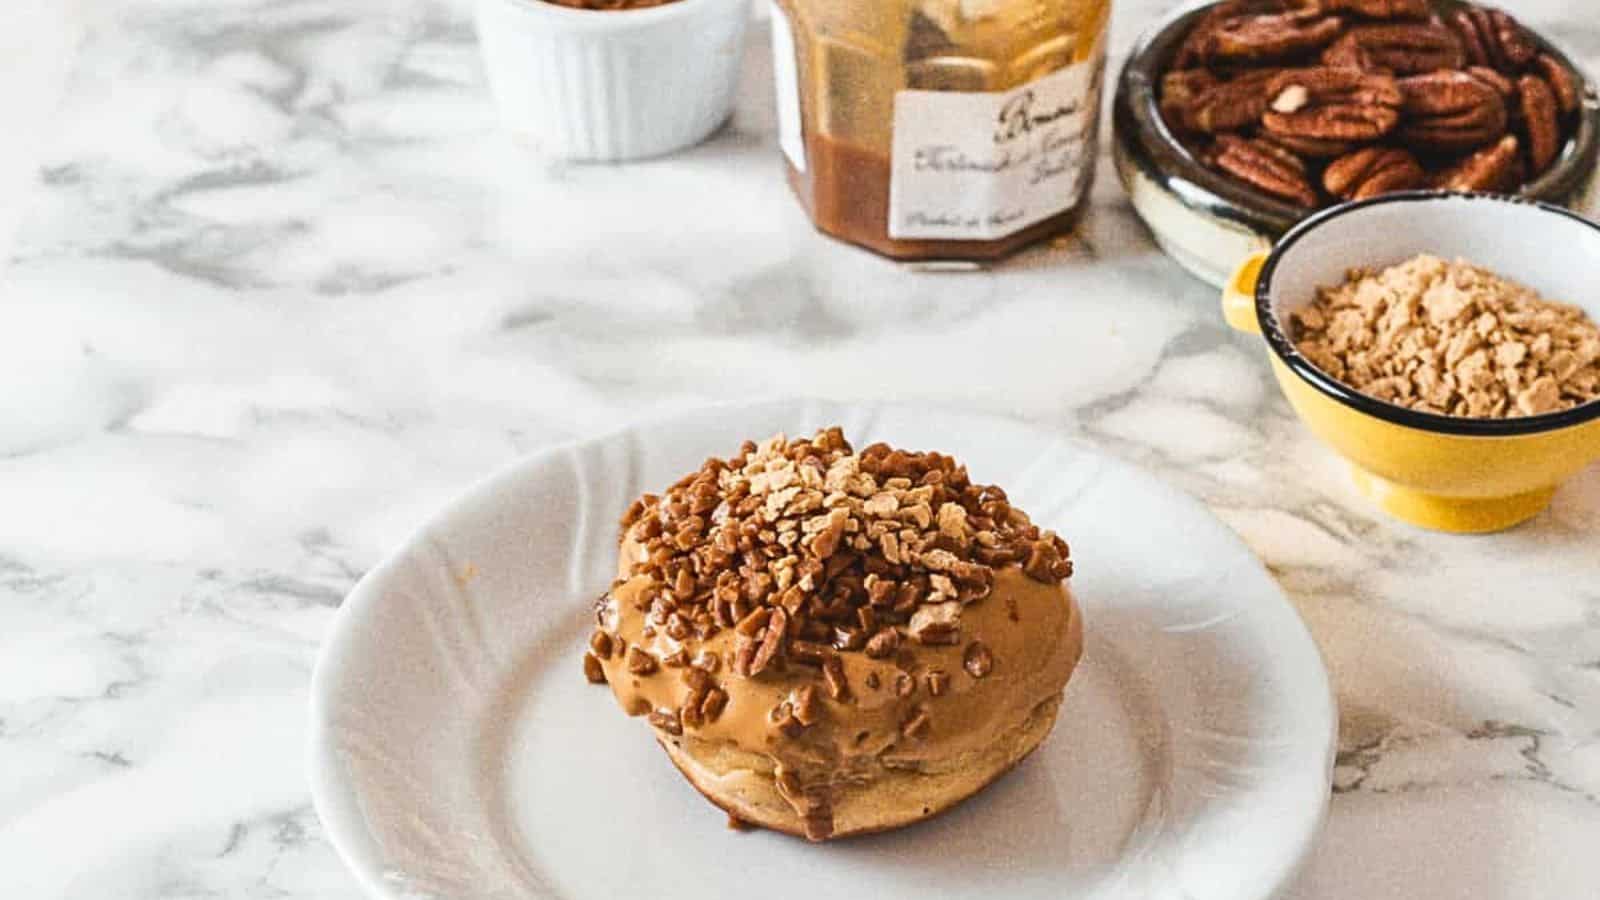 A white plate with a peanut butter doughnut on it.